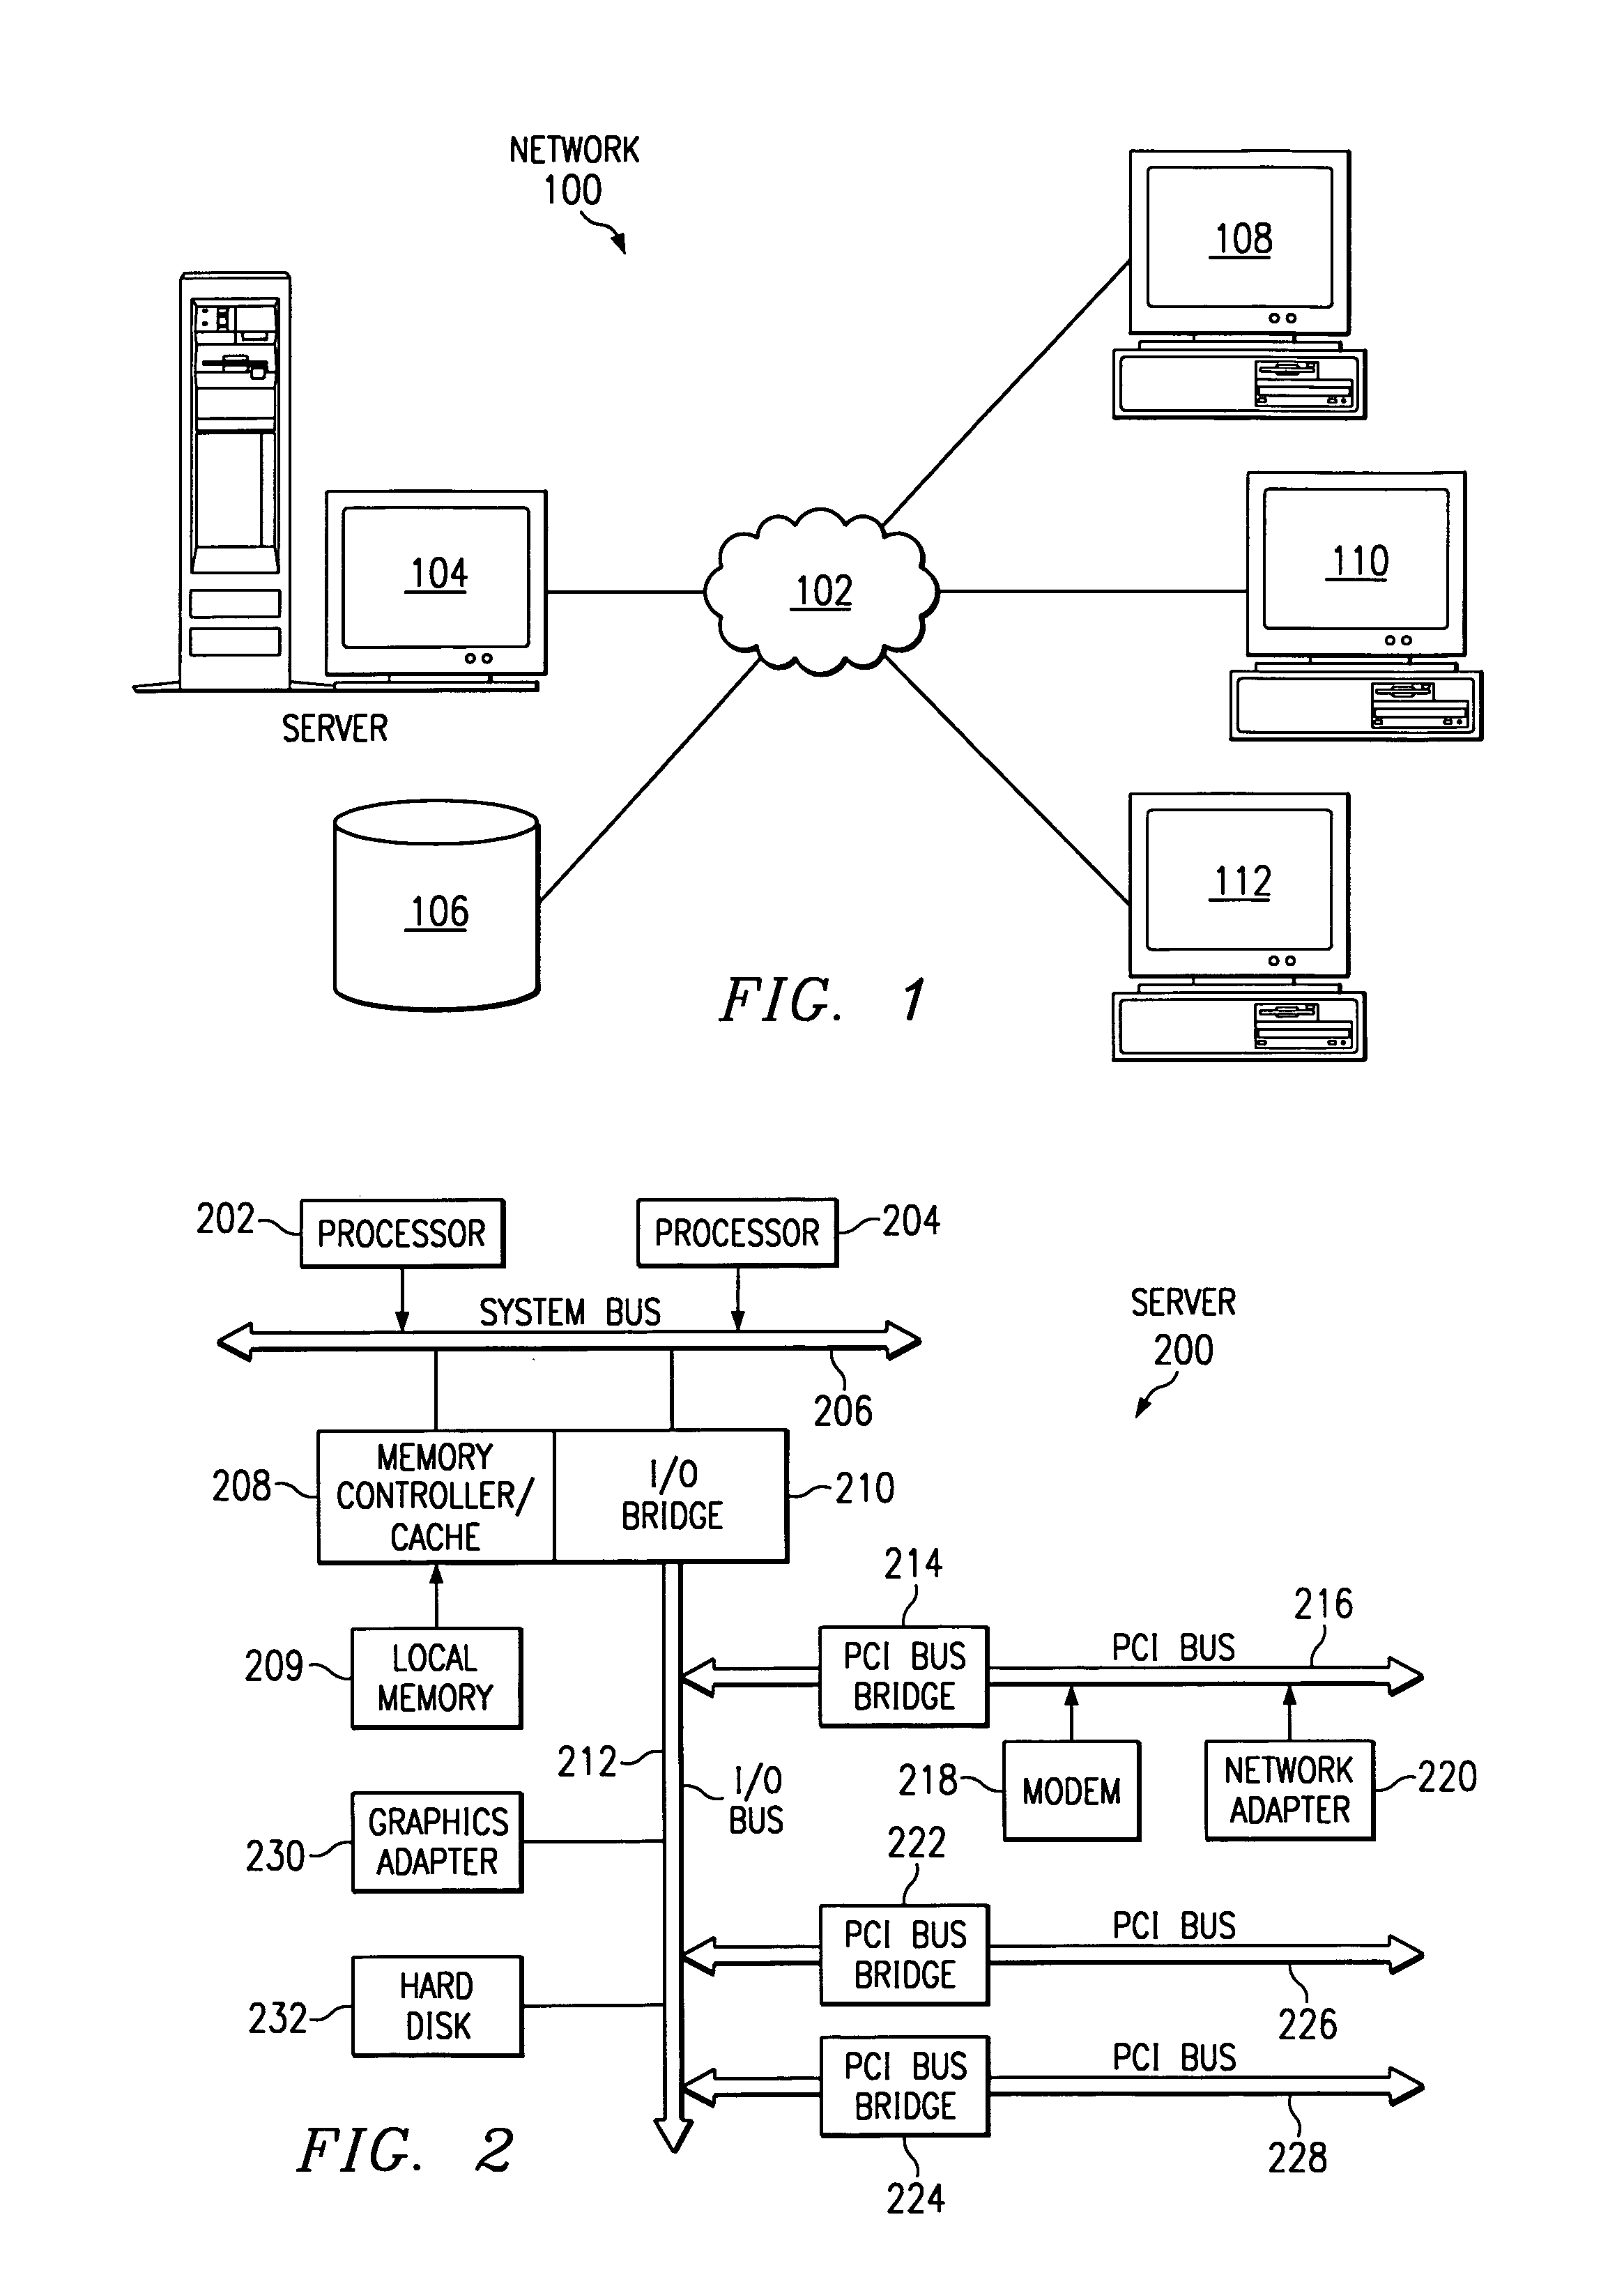 Method and apparatus for providing reduced cost online service and adaptive targeting of advertisements